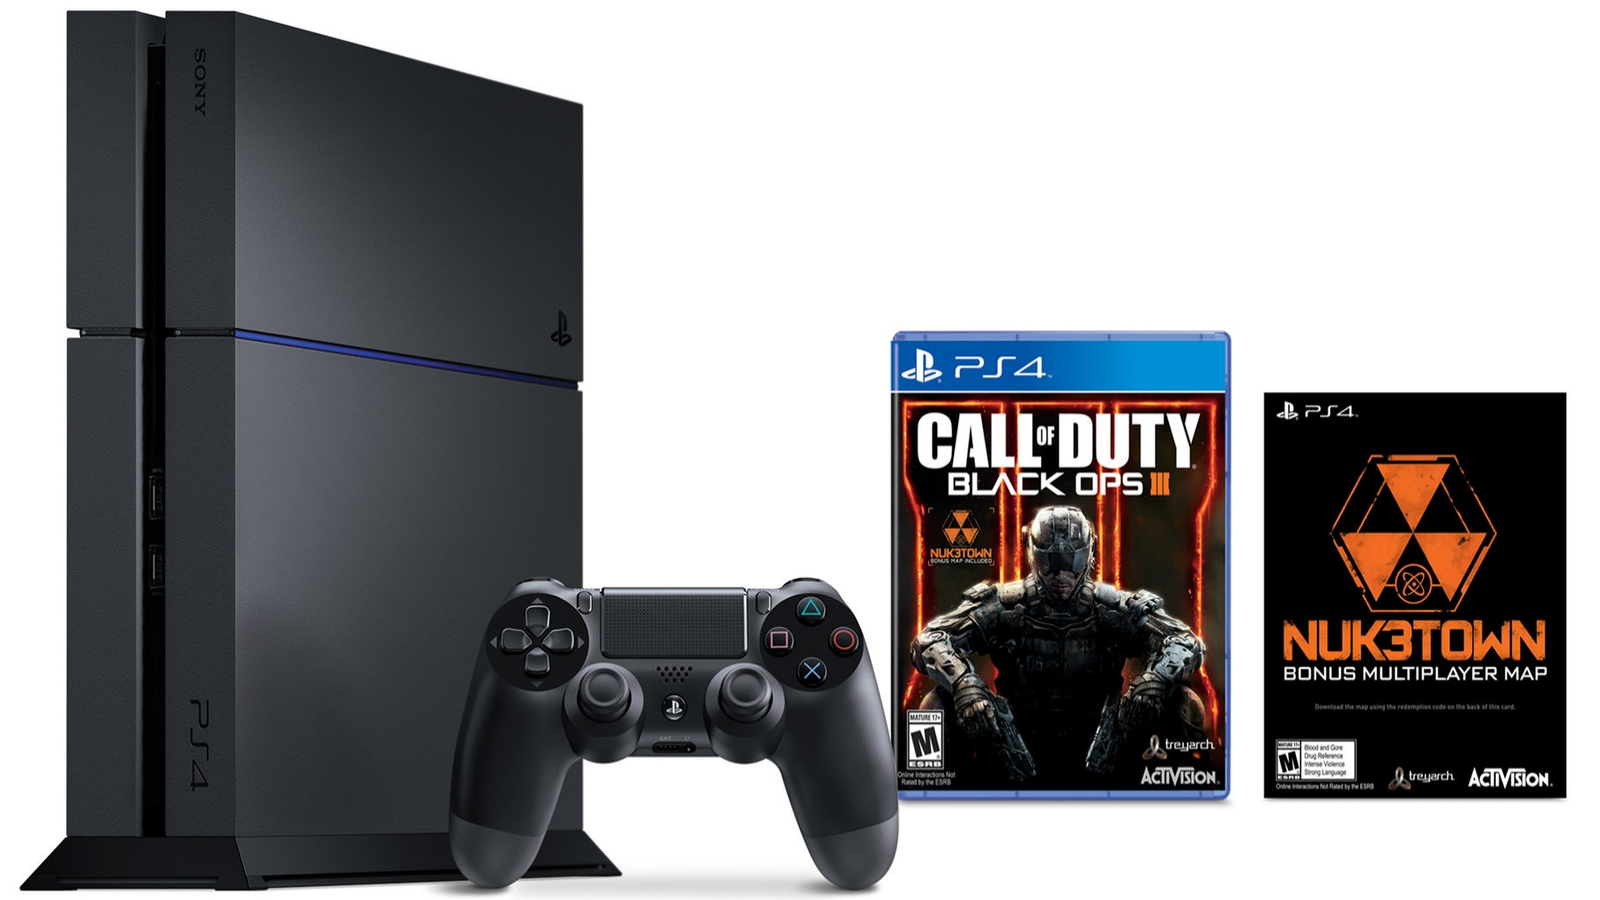 Get the Call of Duty: Black Ops 3 bundle for $330 | VG247